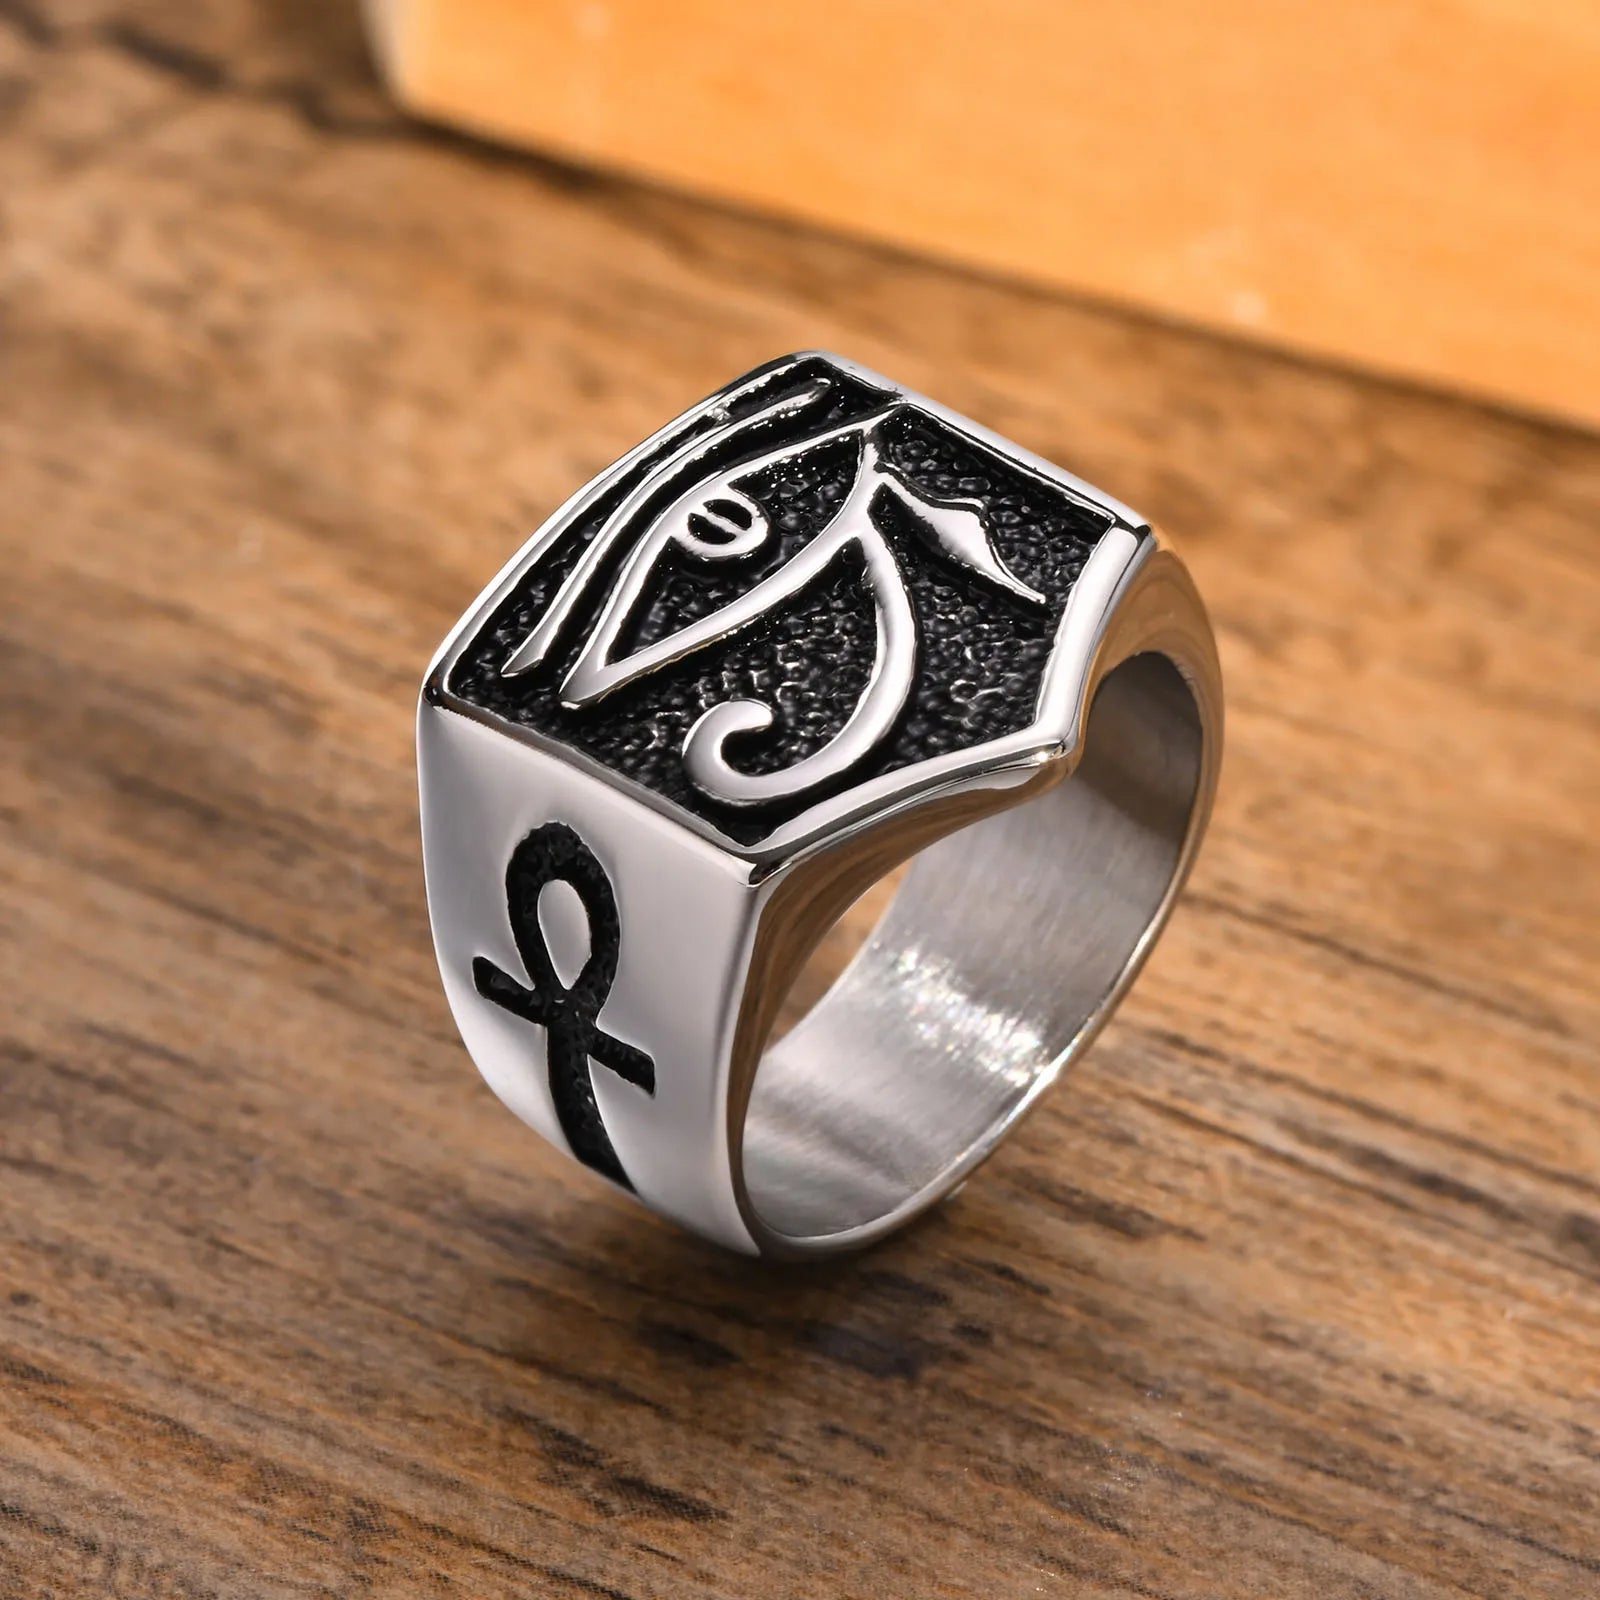 University of New Hampshire Brotherhood Ring – Southern Recognition, Inc.